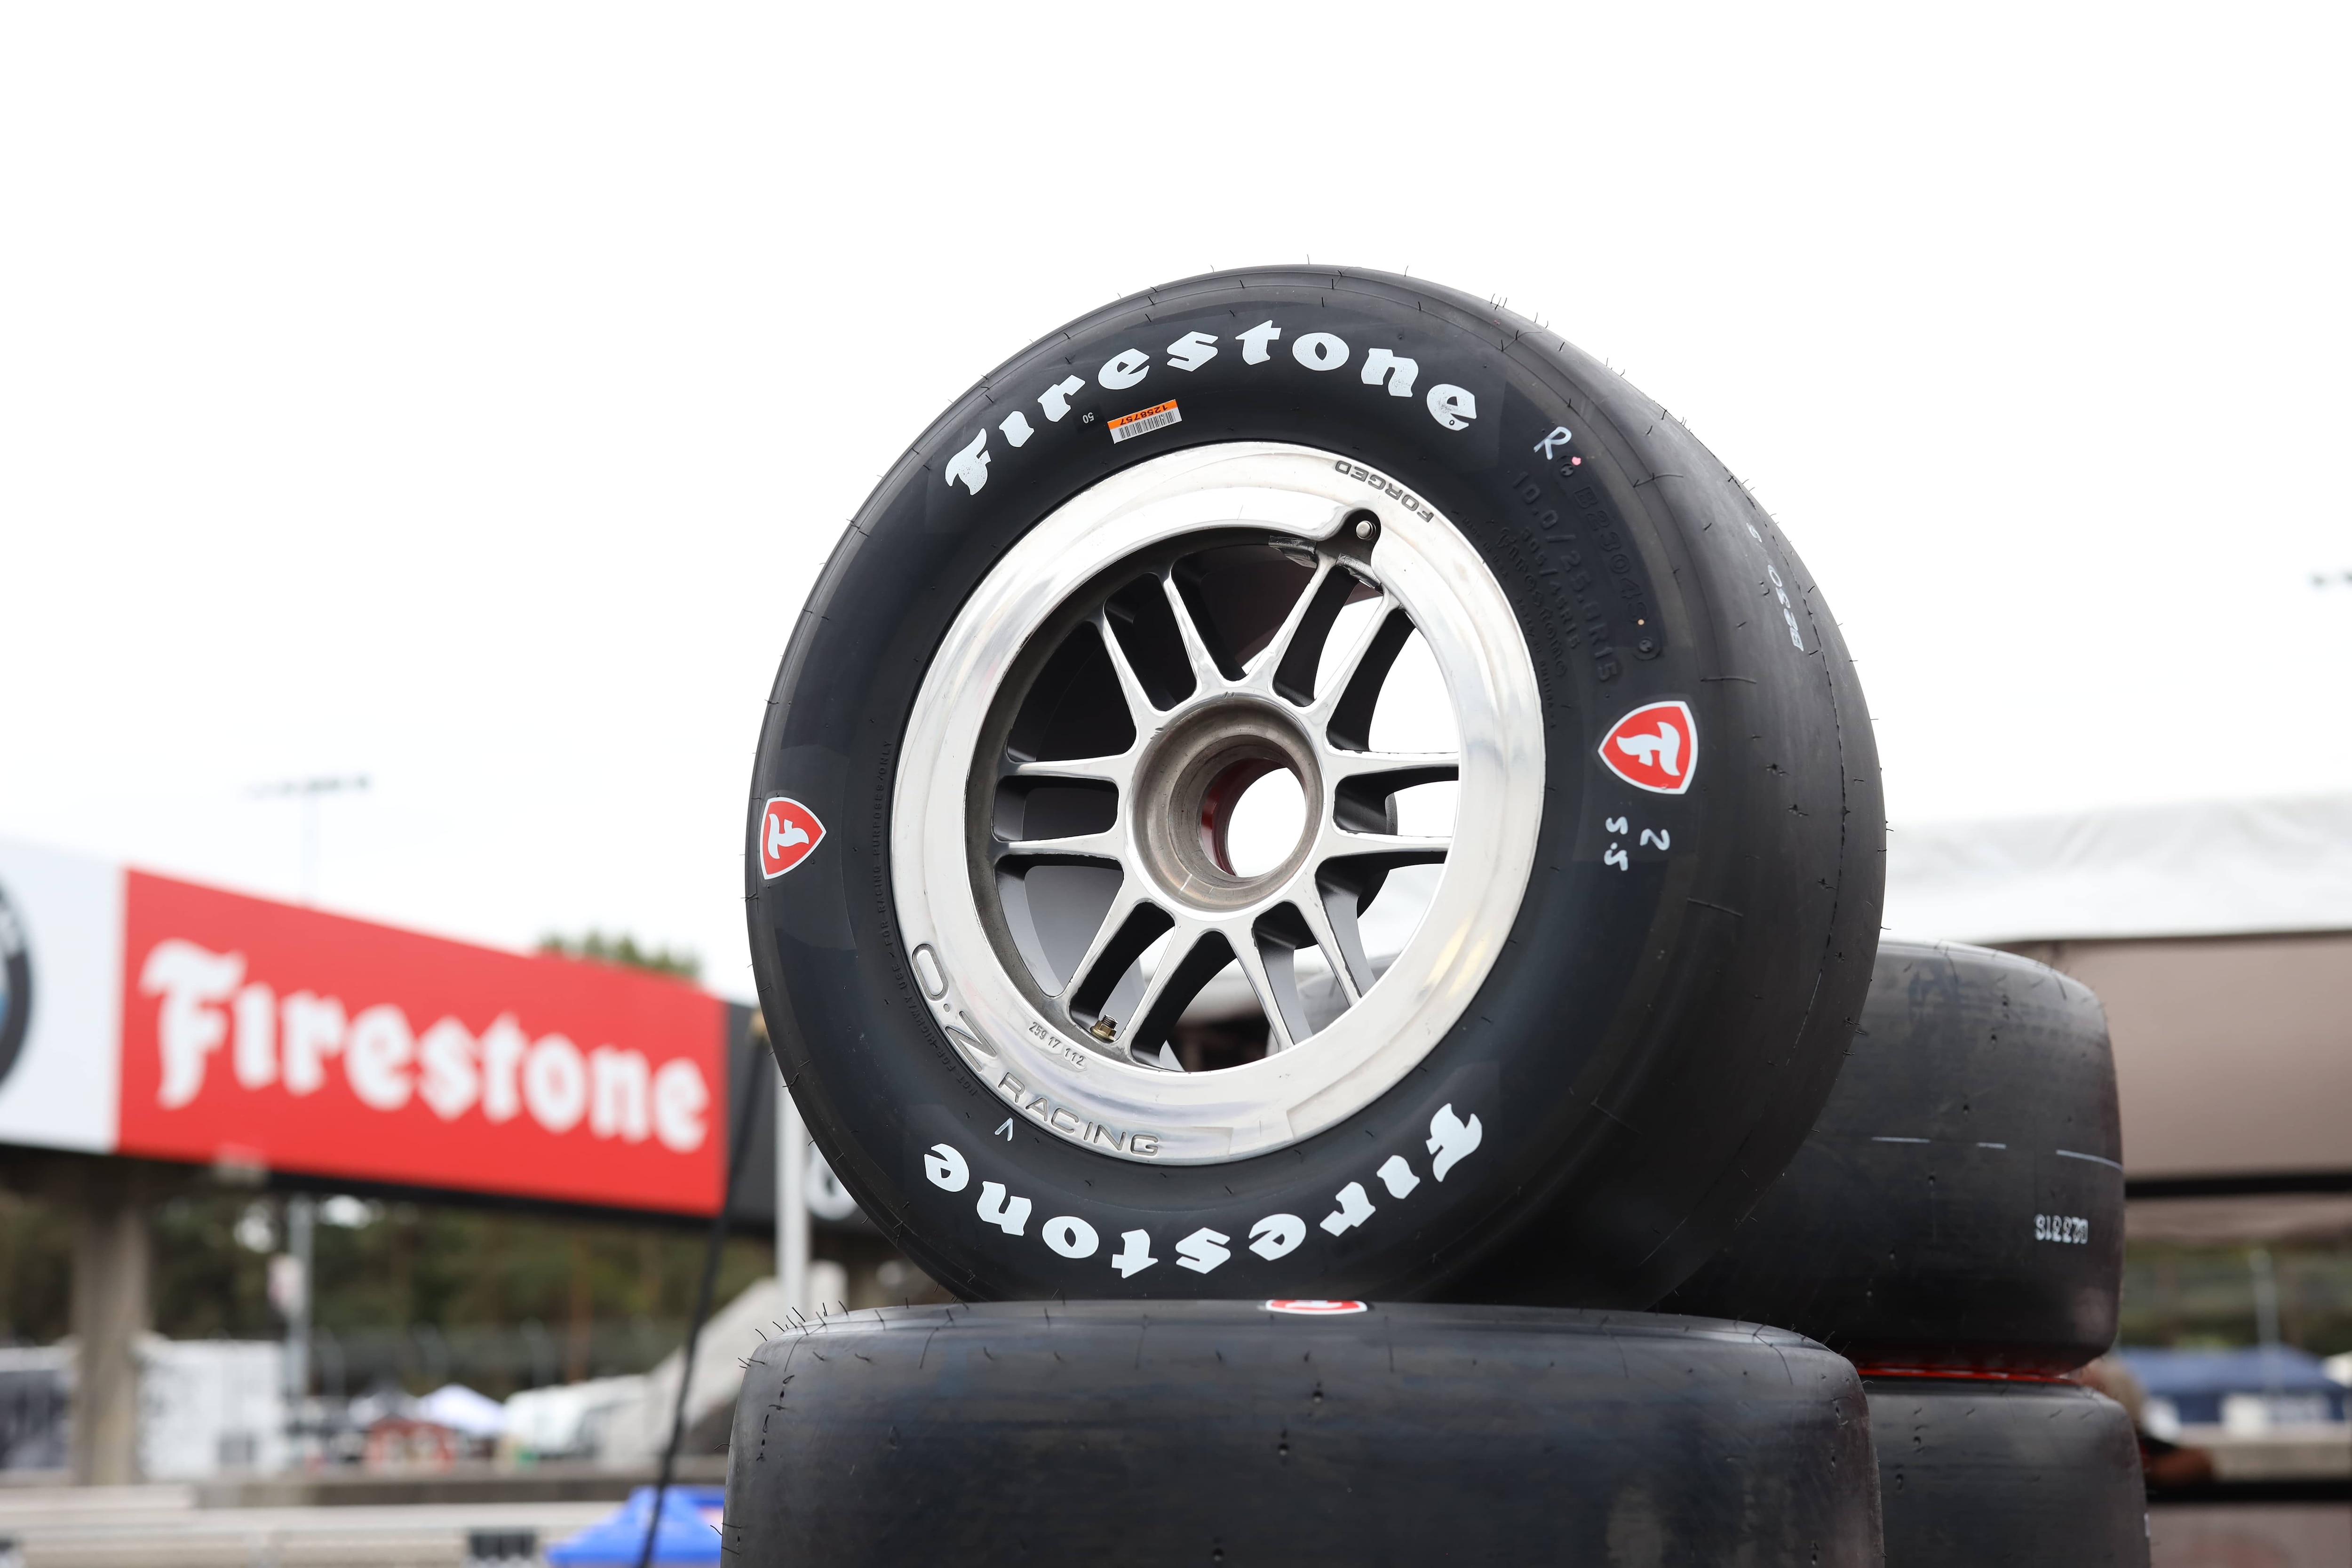 Firestone racing tire on stack of tires